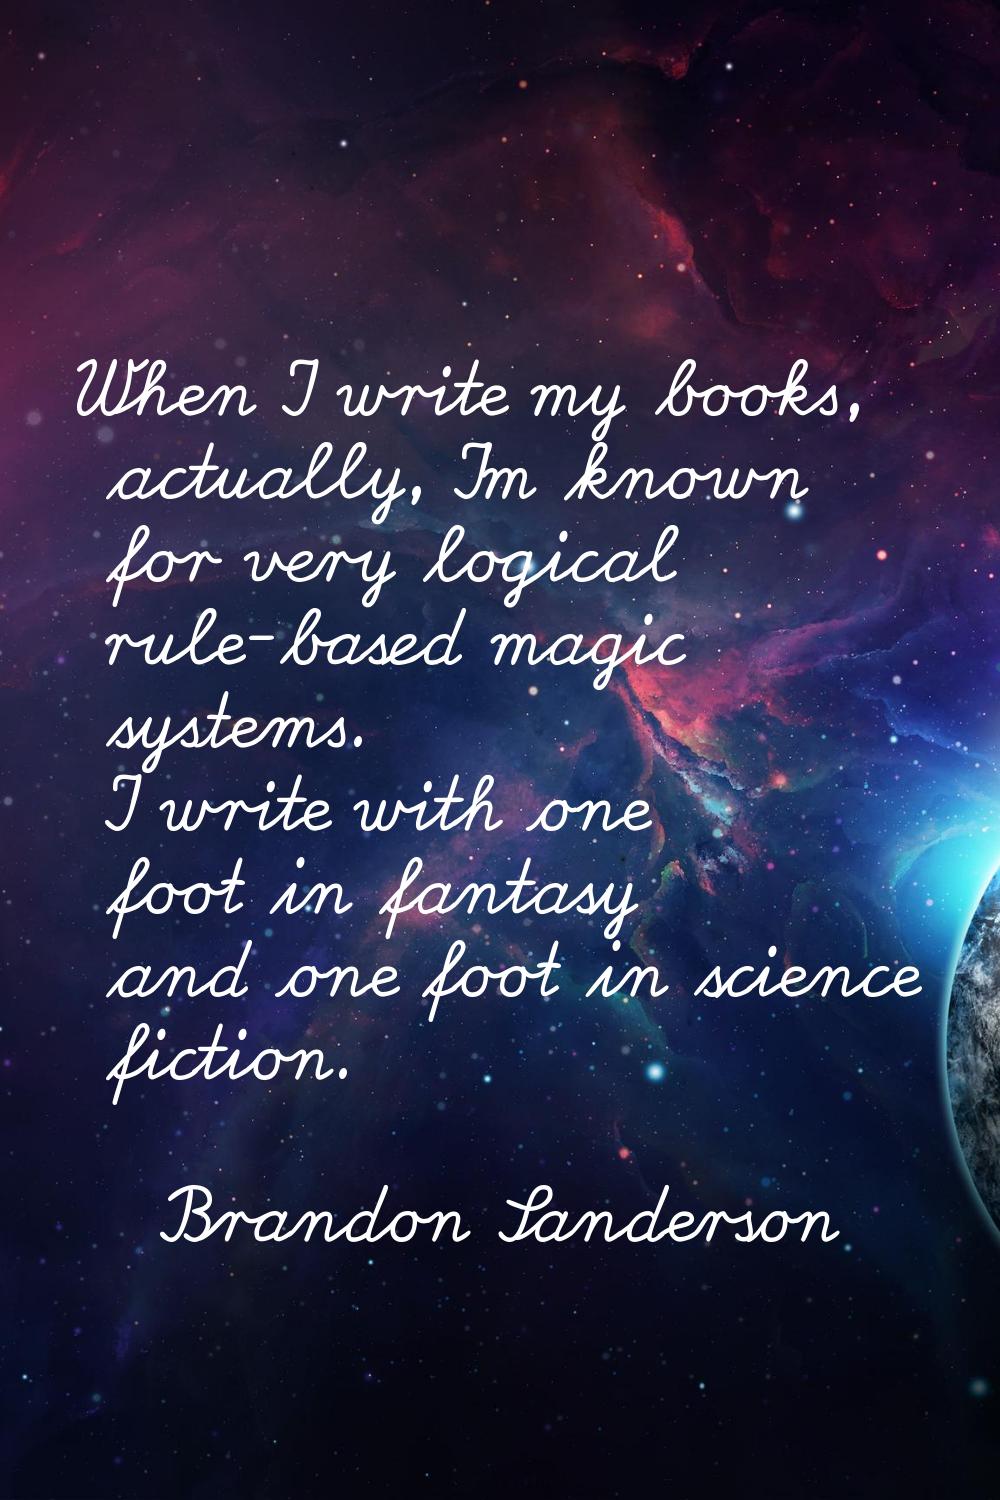 When I write my books, actually, I'm known for very logical rule-based magic systems. I write with 